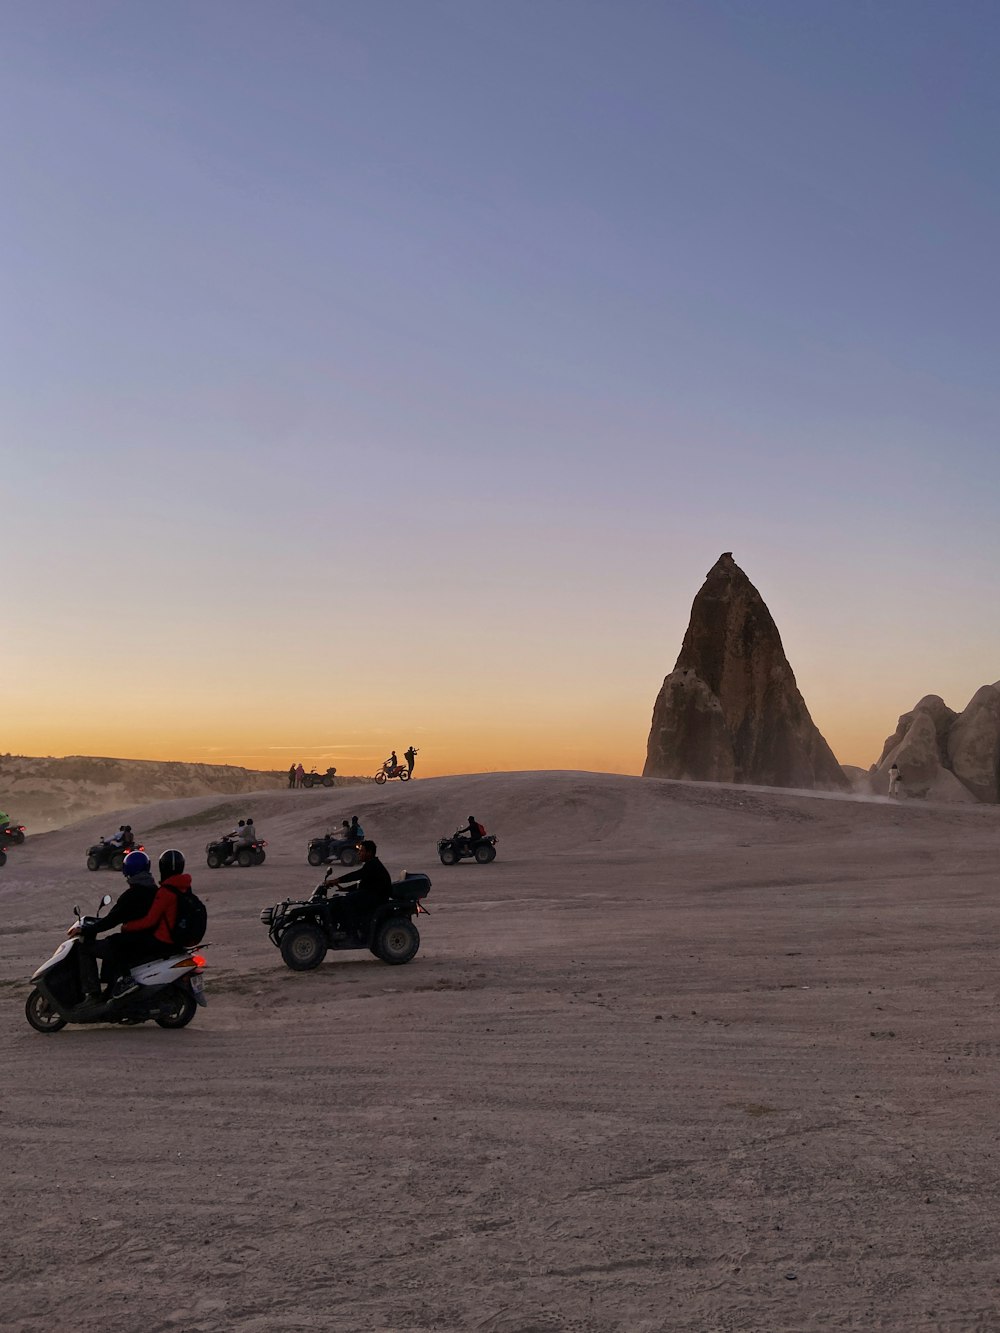 a group of people riding motorcycles in the desert